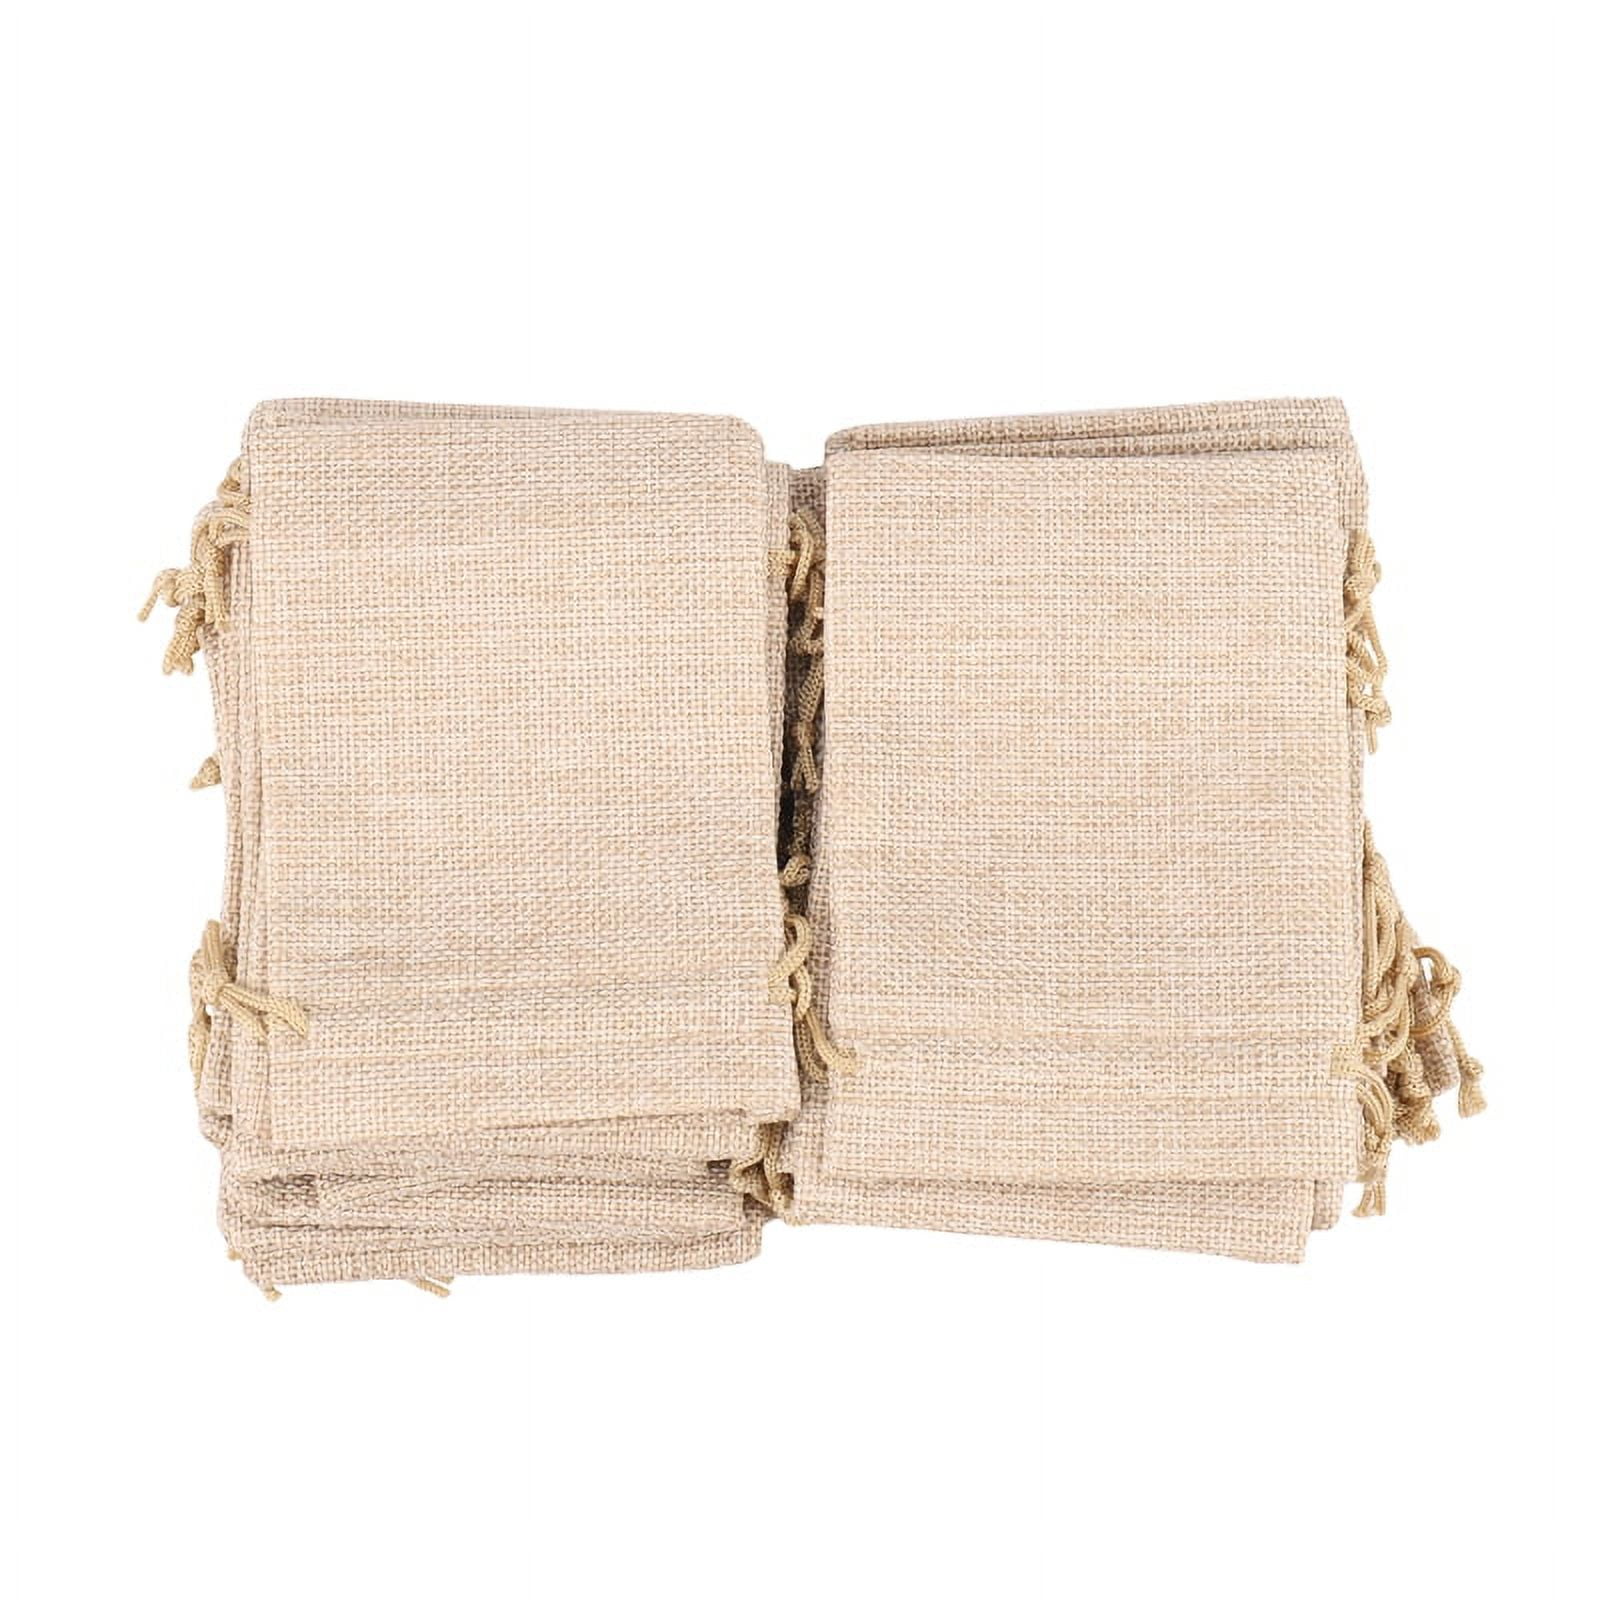 CleverDelights 23 x 40 Burlap Bags - 3 Pack - Heavy Duty Stitching